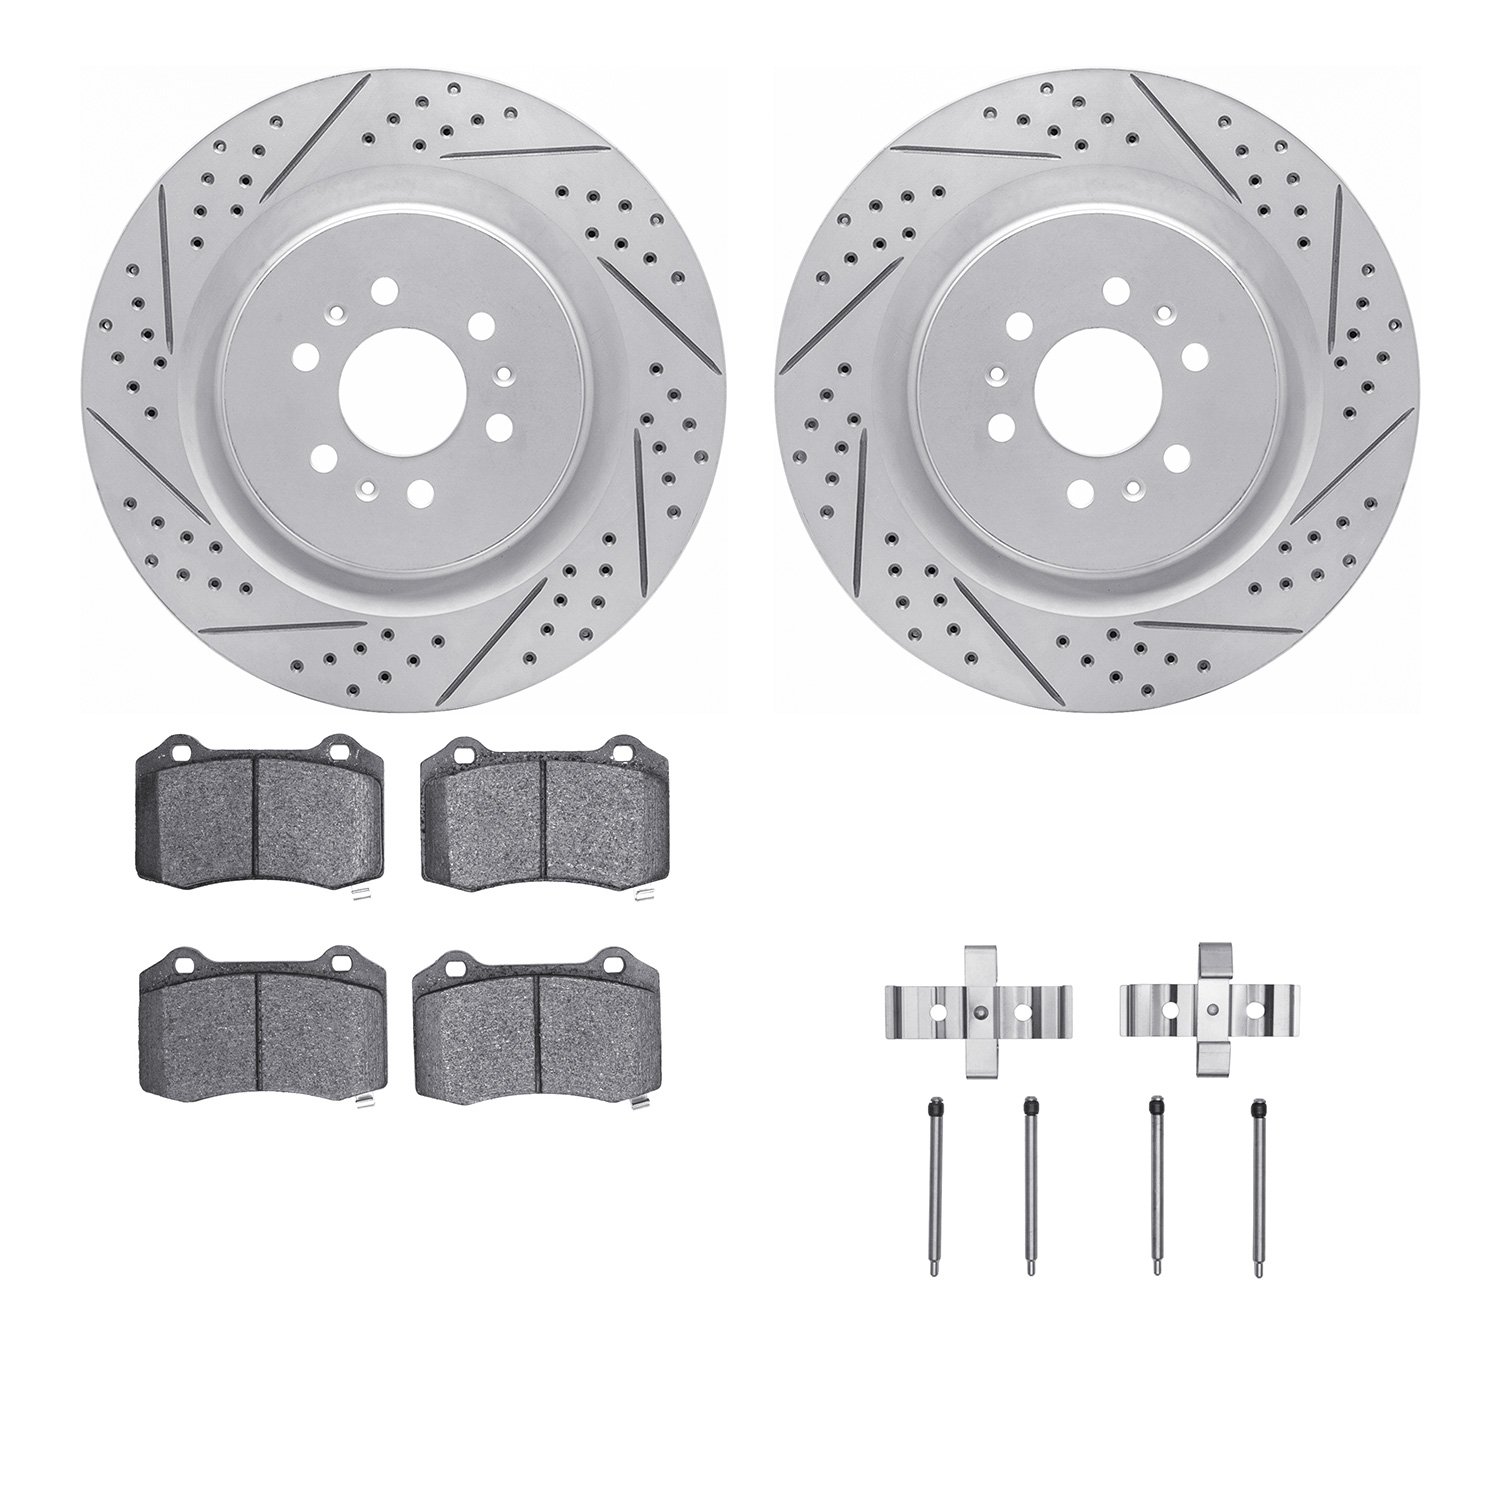 2512-46093 Geoperformance Drilled/Slotted Rotors w/5000 Advanced Brake Pads Kit & Hardware, 2004-2011 GM, Position: Rear